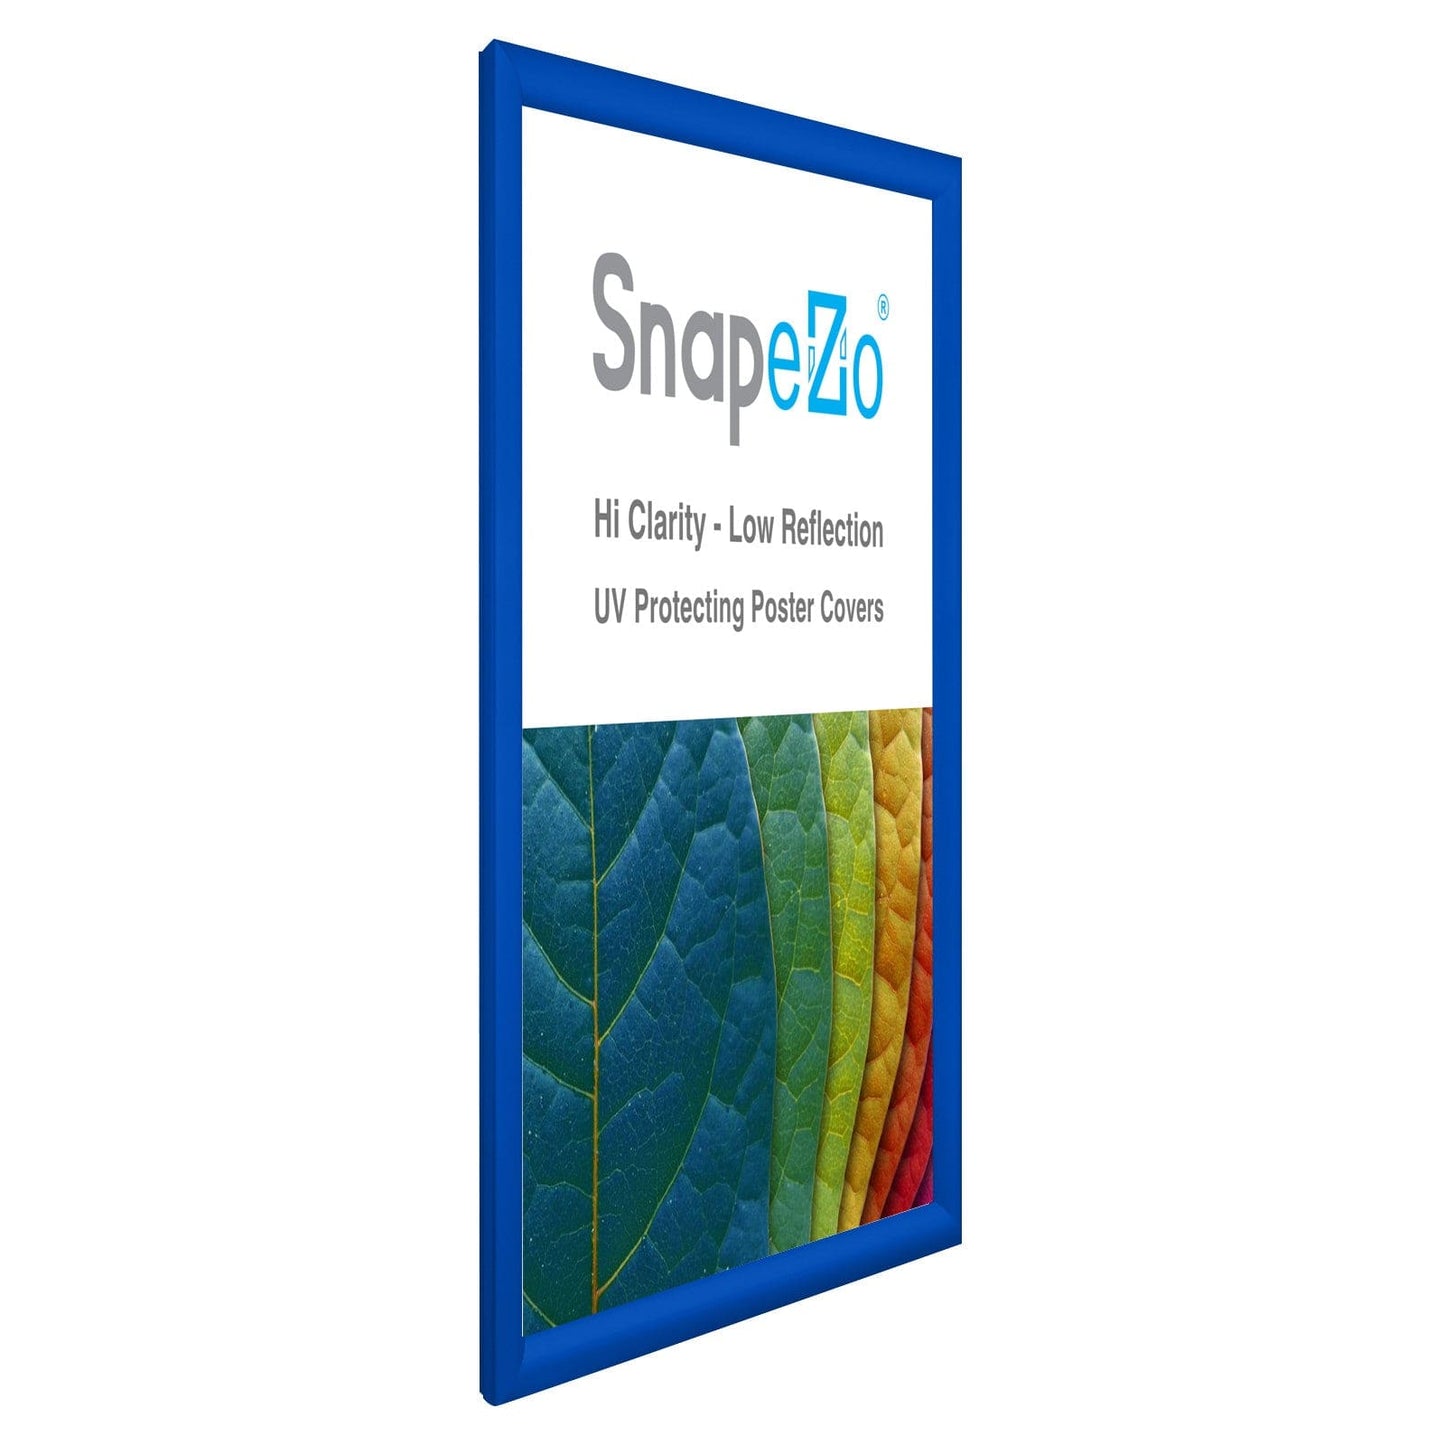 19x24 Blue SnapeZo® Snap Frame - 1.2" Profile - Snap Frames Direct